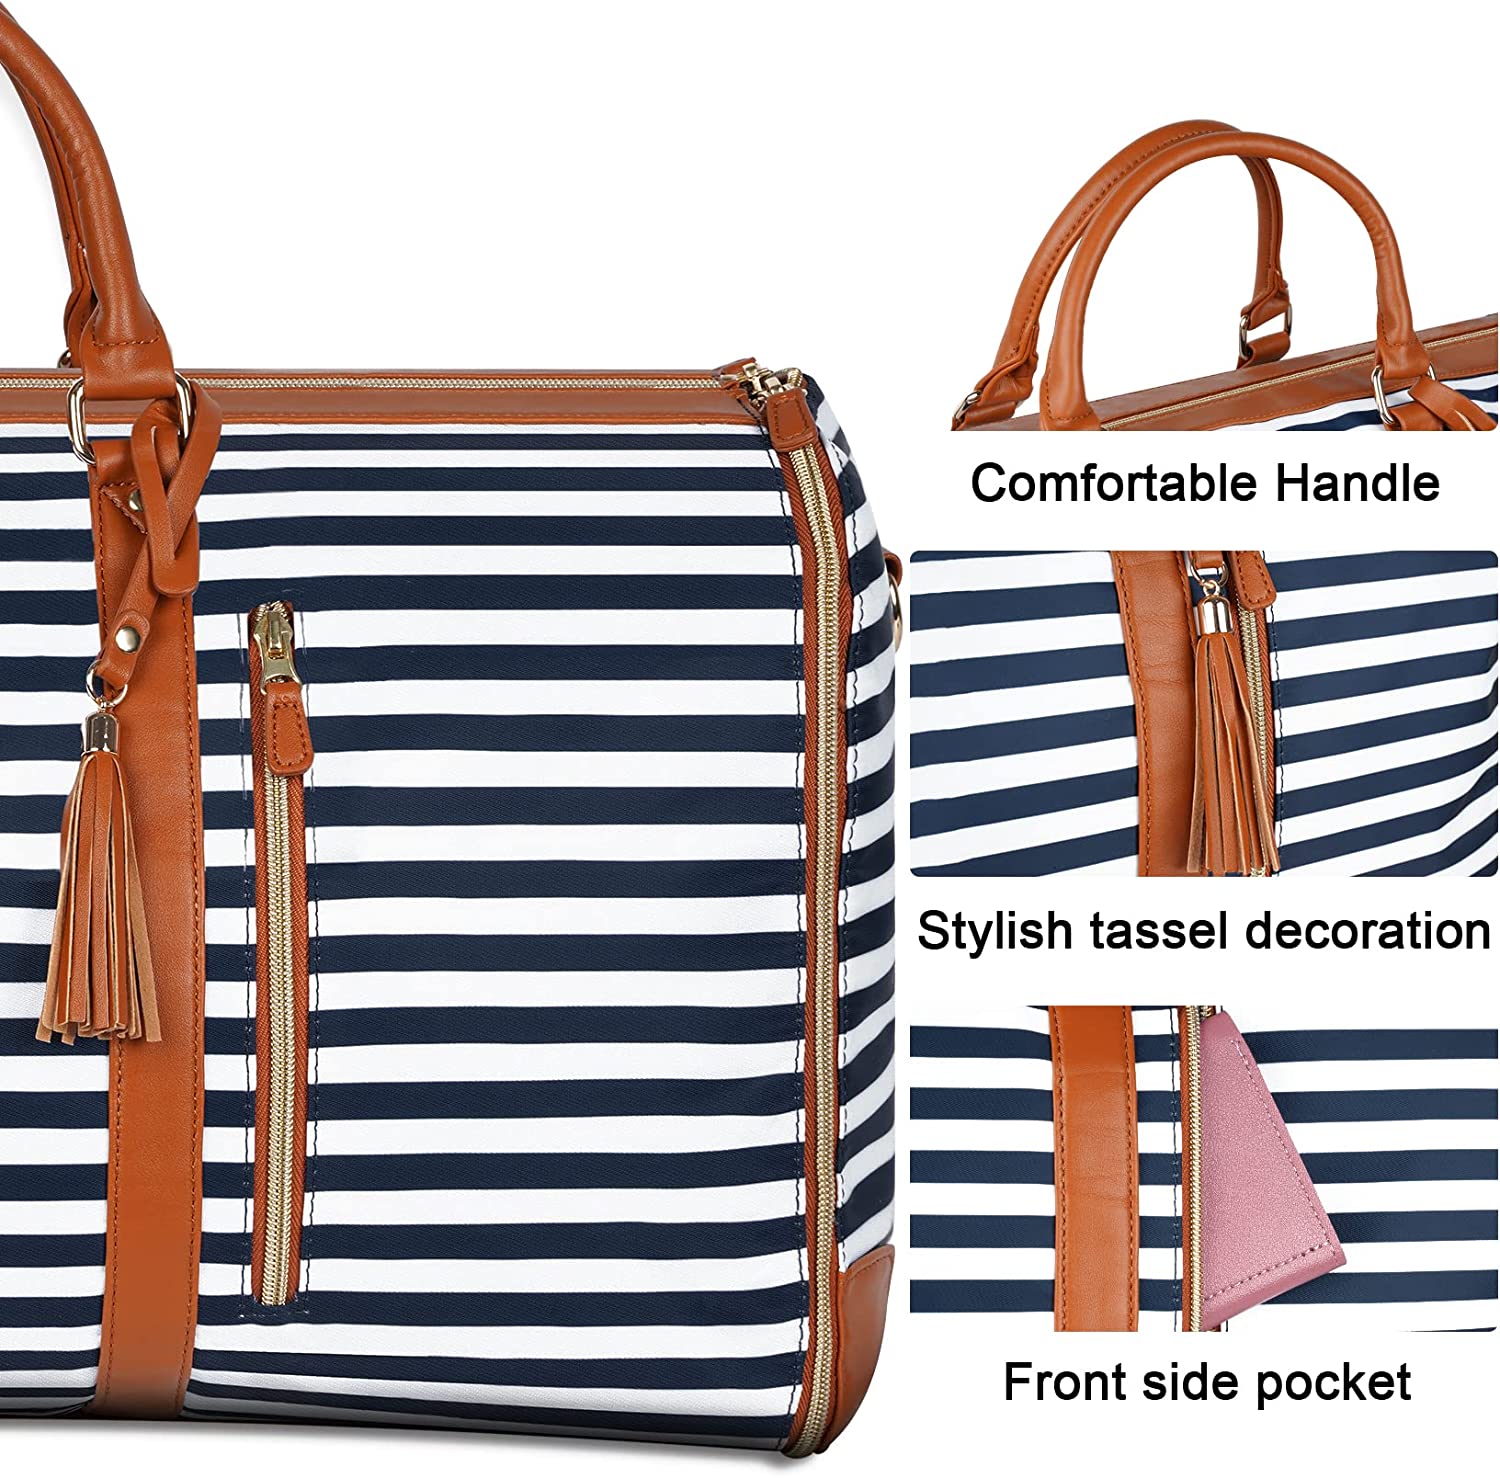 The Convertible Duffle